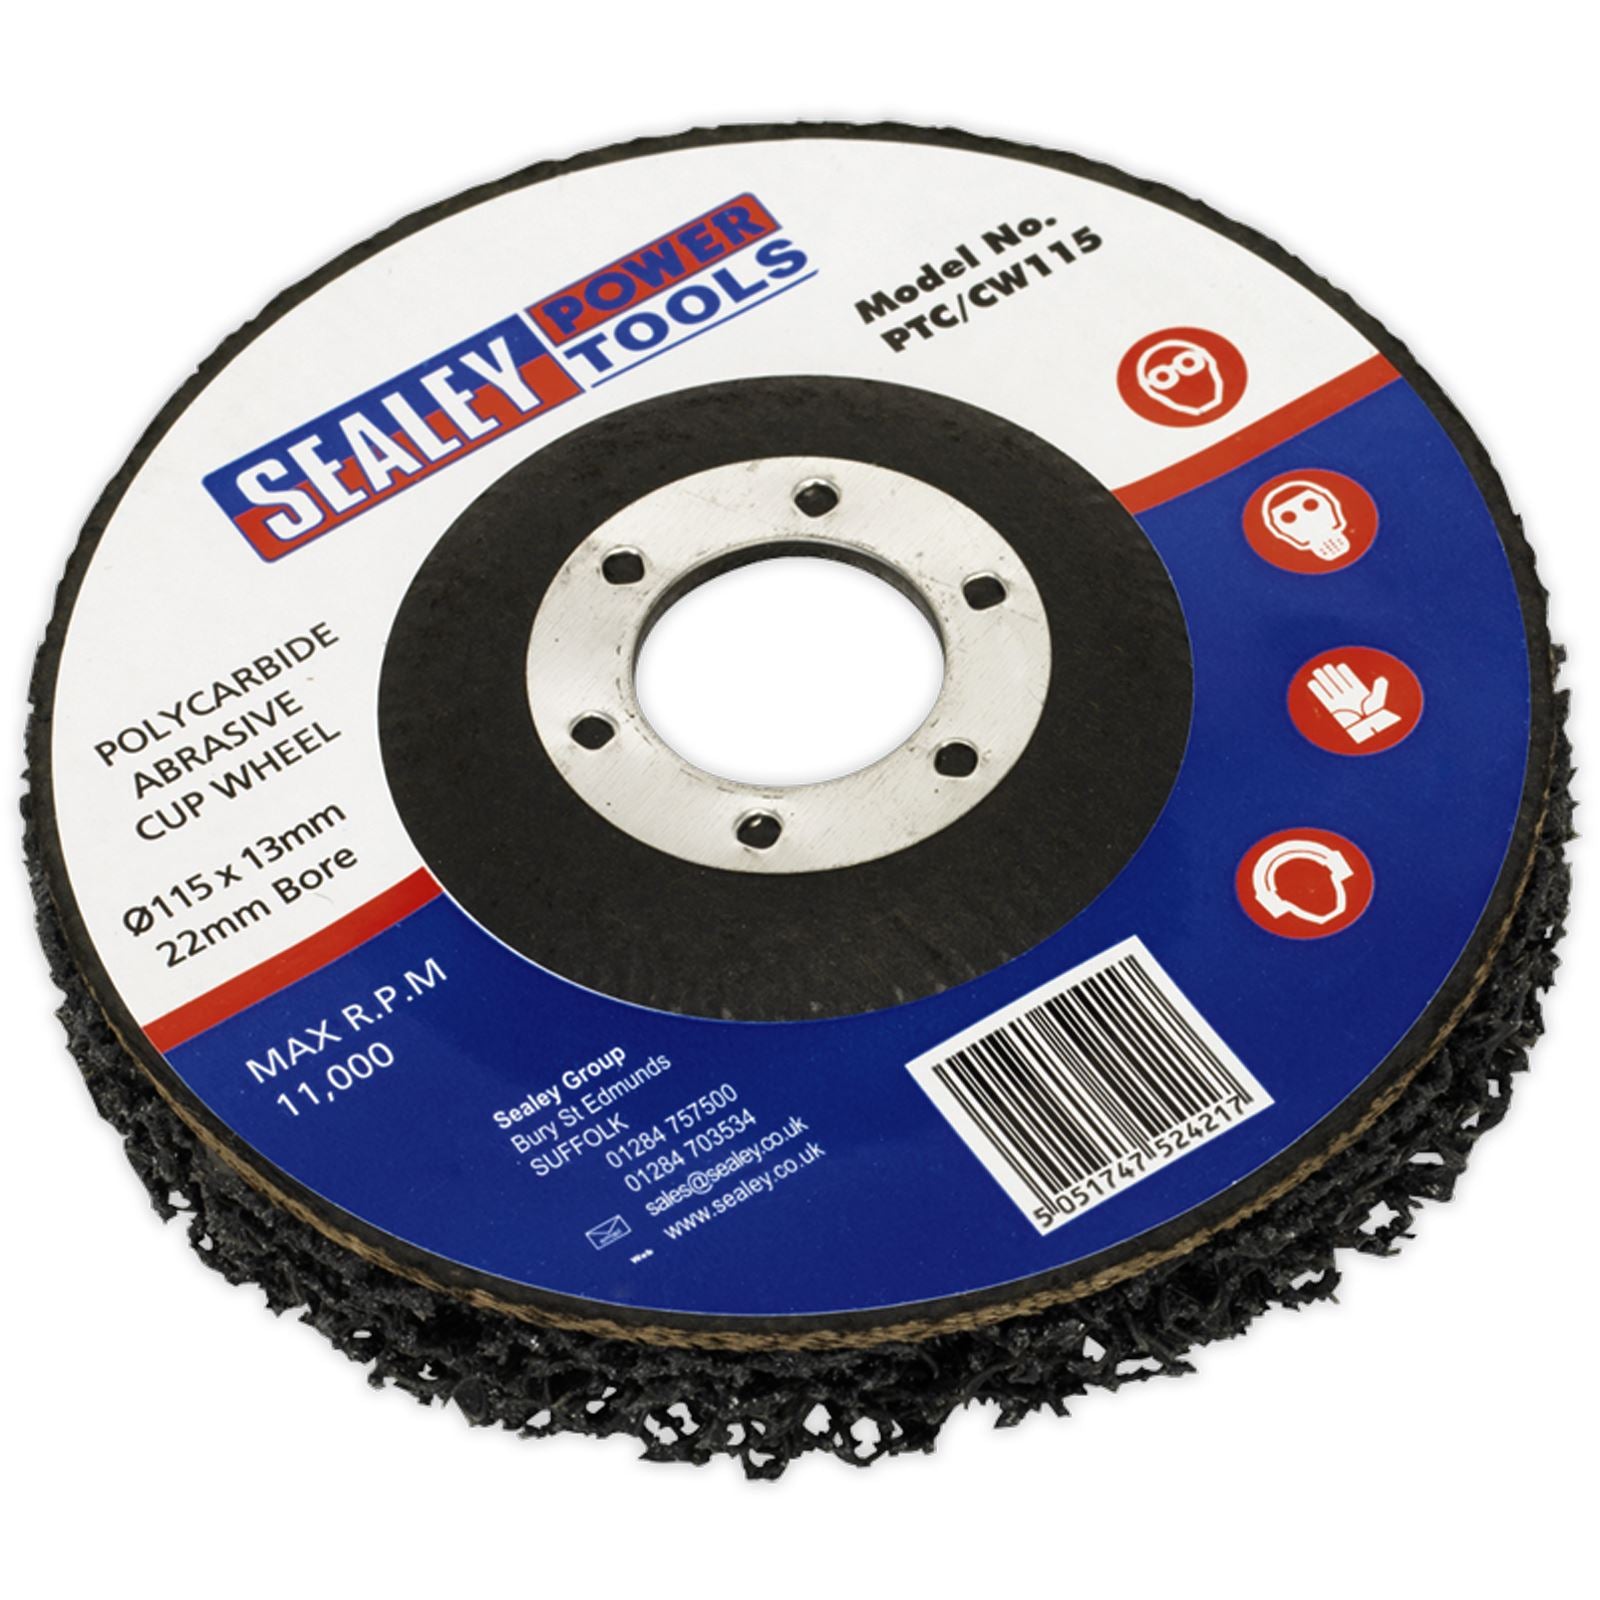 Sealey 115mm Polycarbide Abrasive Cup Wheel Paint Rust Removal Angle Grinder